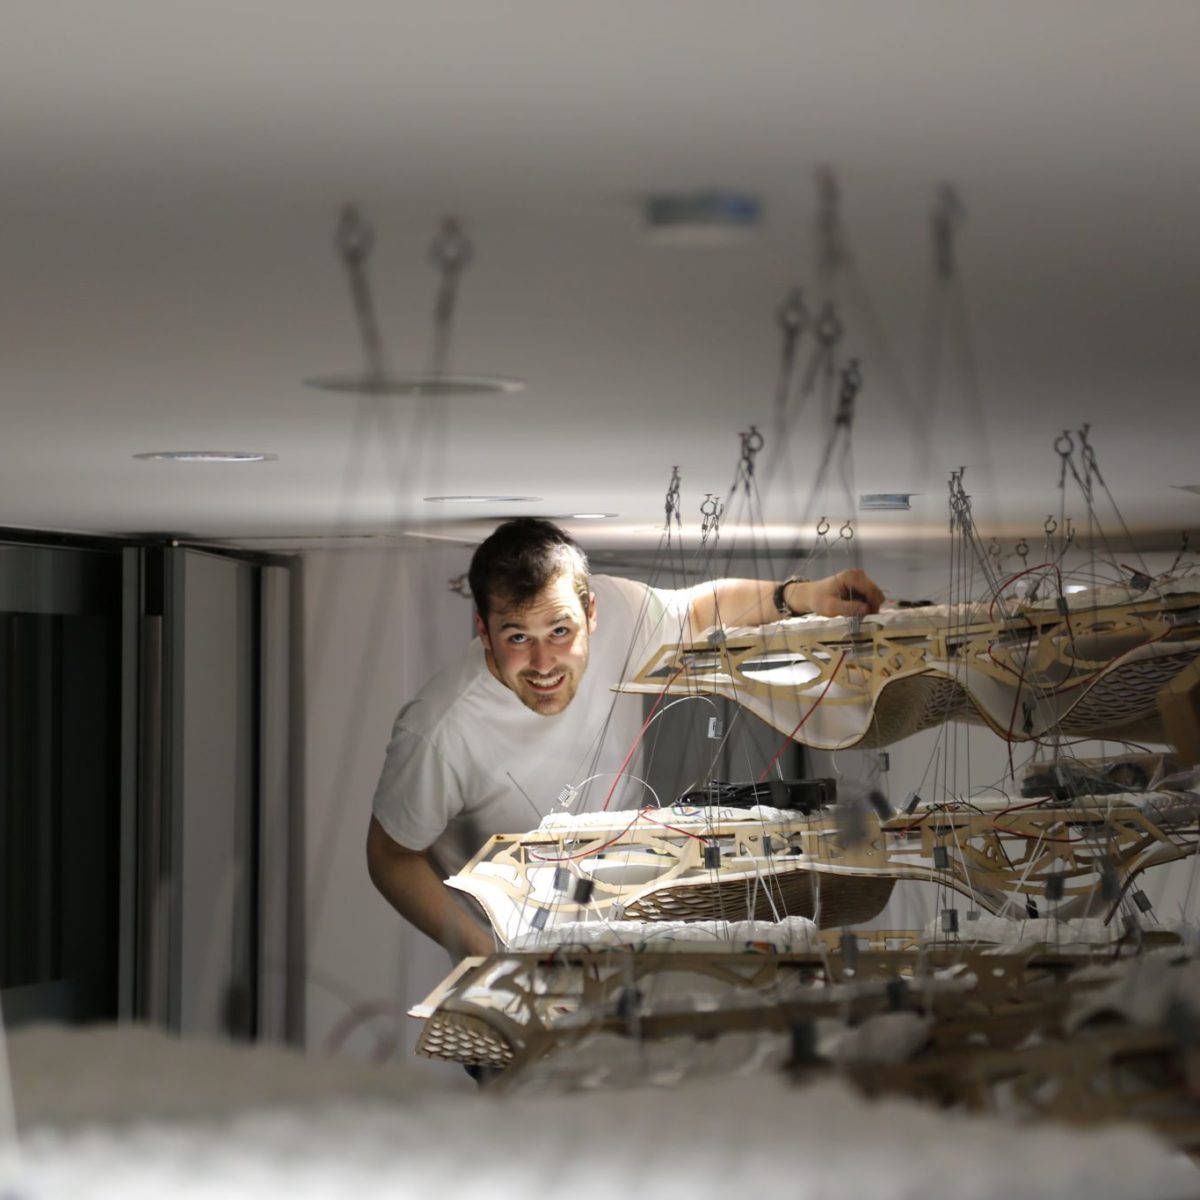 The Wooden Waves - Buro Happold - The ceiling Installation at 71 Newman Street Wiring up the steel cables and LED Strips Picture by Dr. Zoe Laughlin ©Mamou-Mani